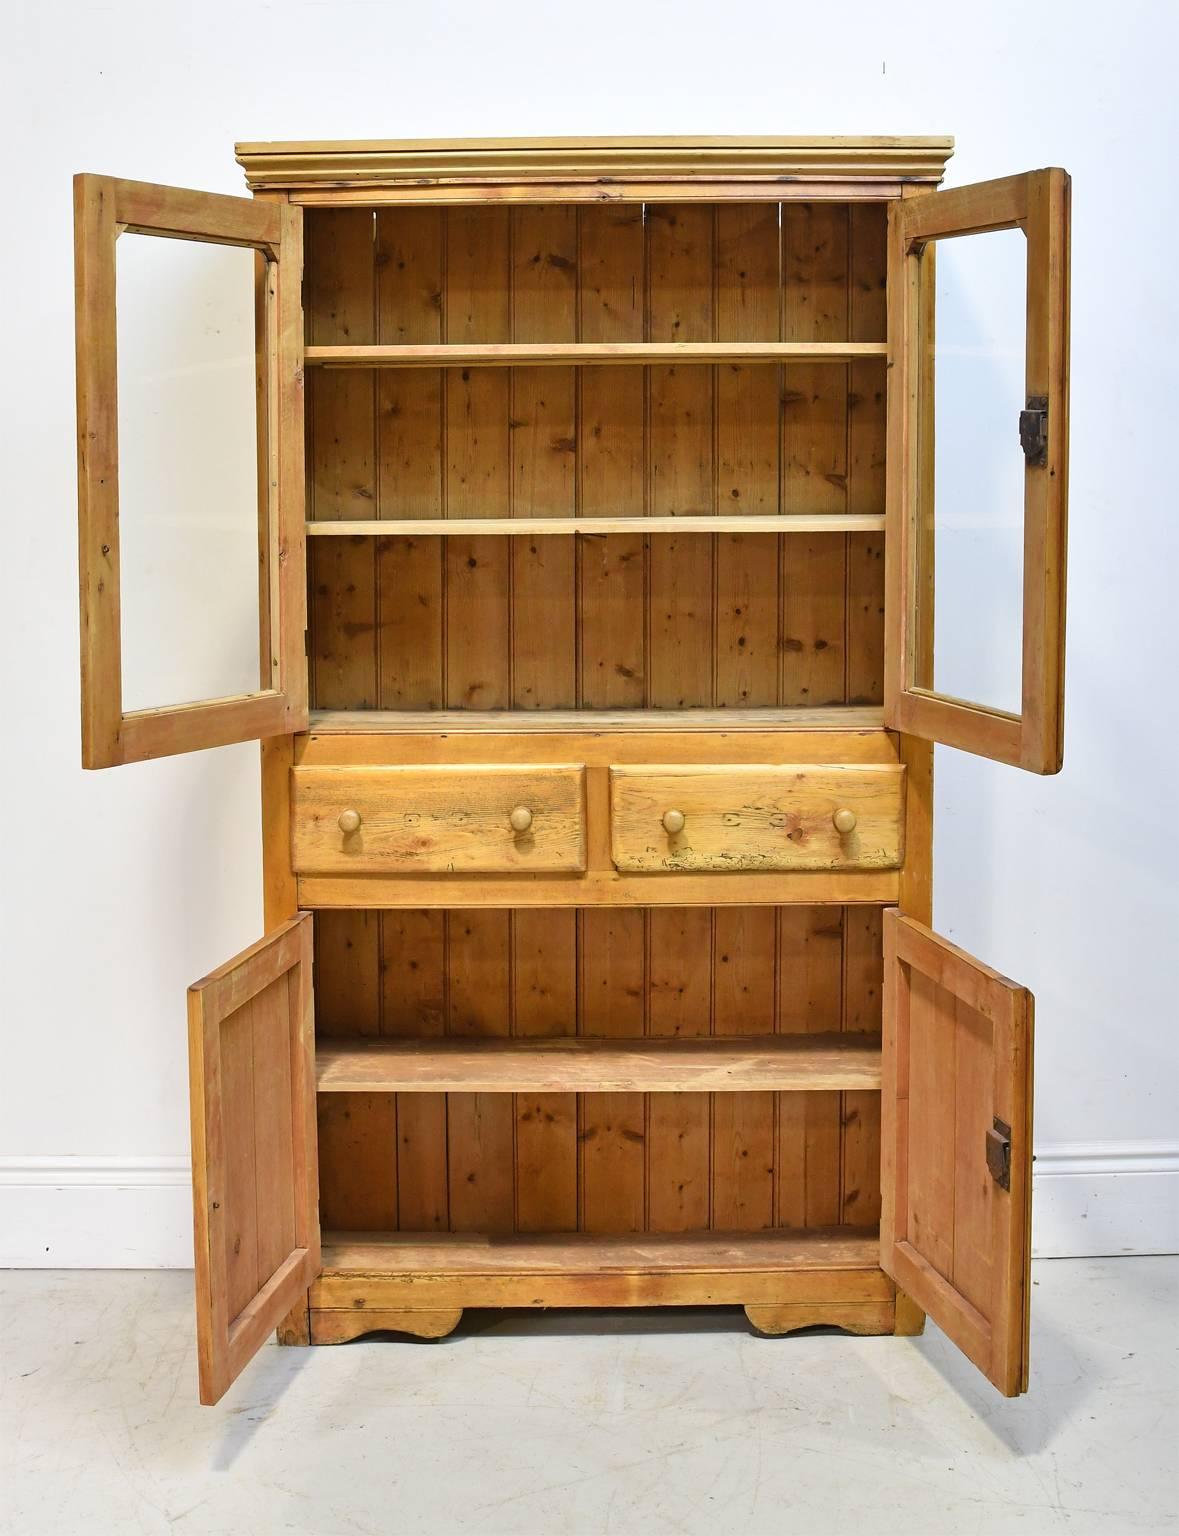 A very shallow pine cupboard with two glazed doors & two paneled wood doors divided by a set of drawers. A charming piece for toys, books, towels or liquor! England or Scotland, circa mid 1800's.
44 3/4